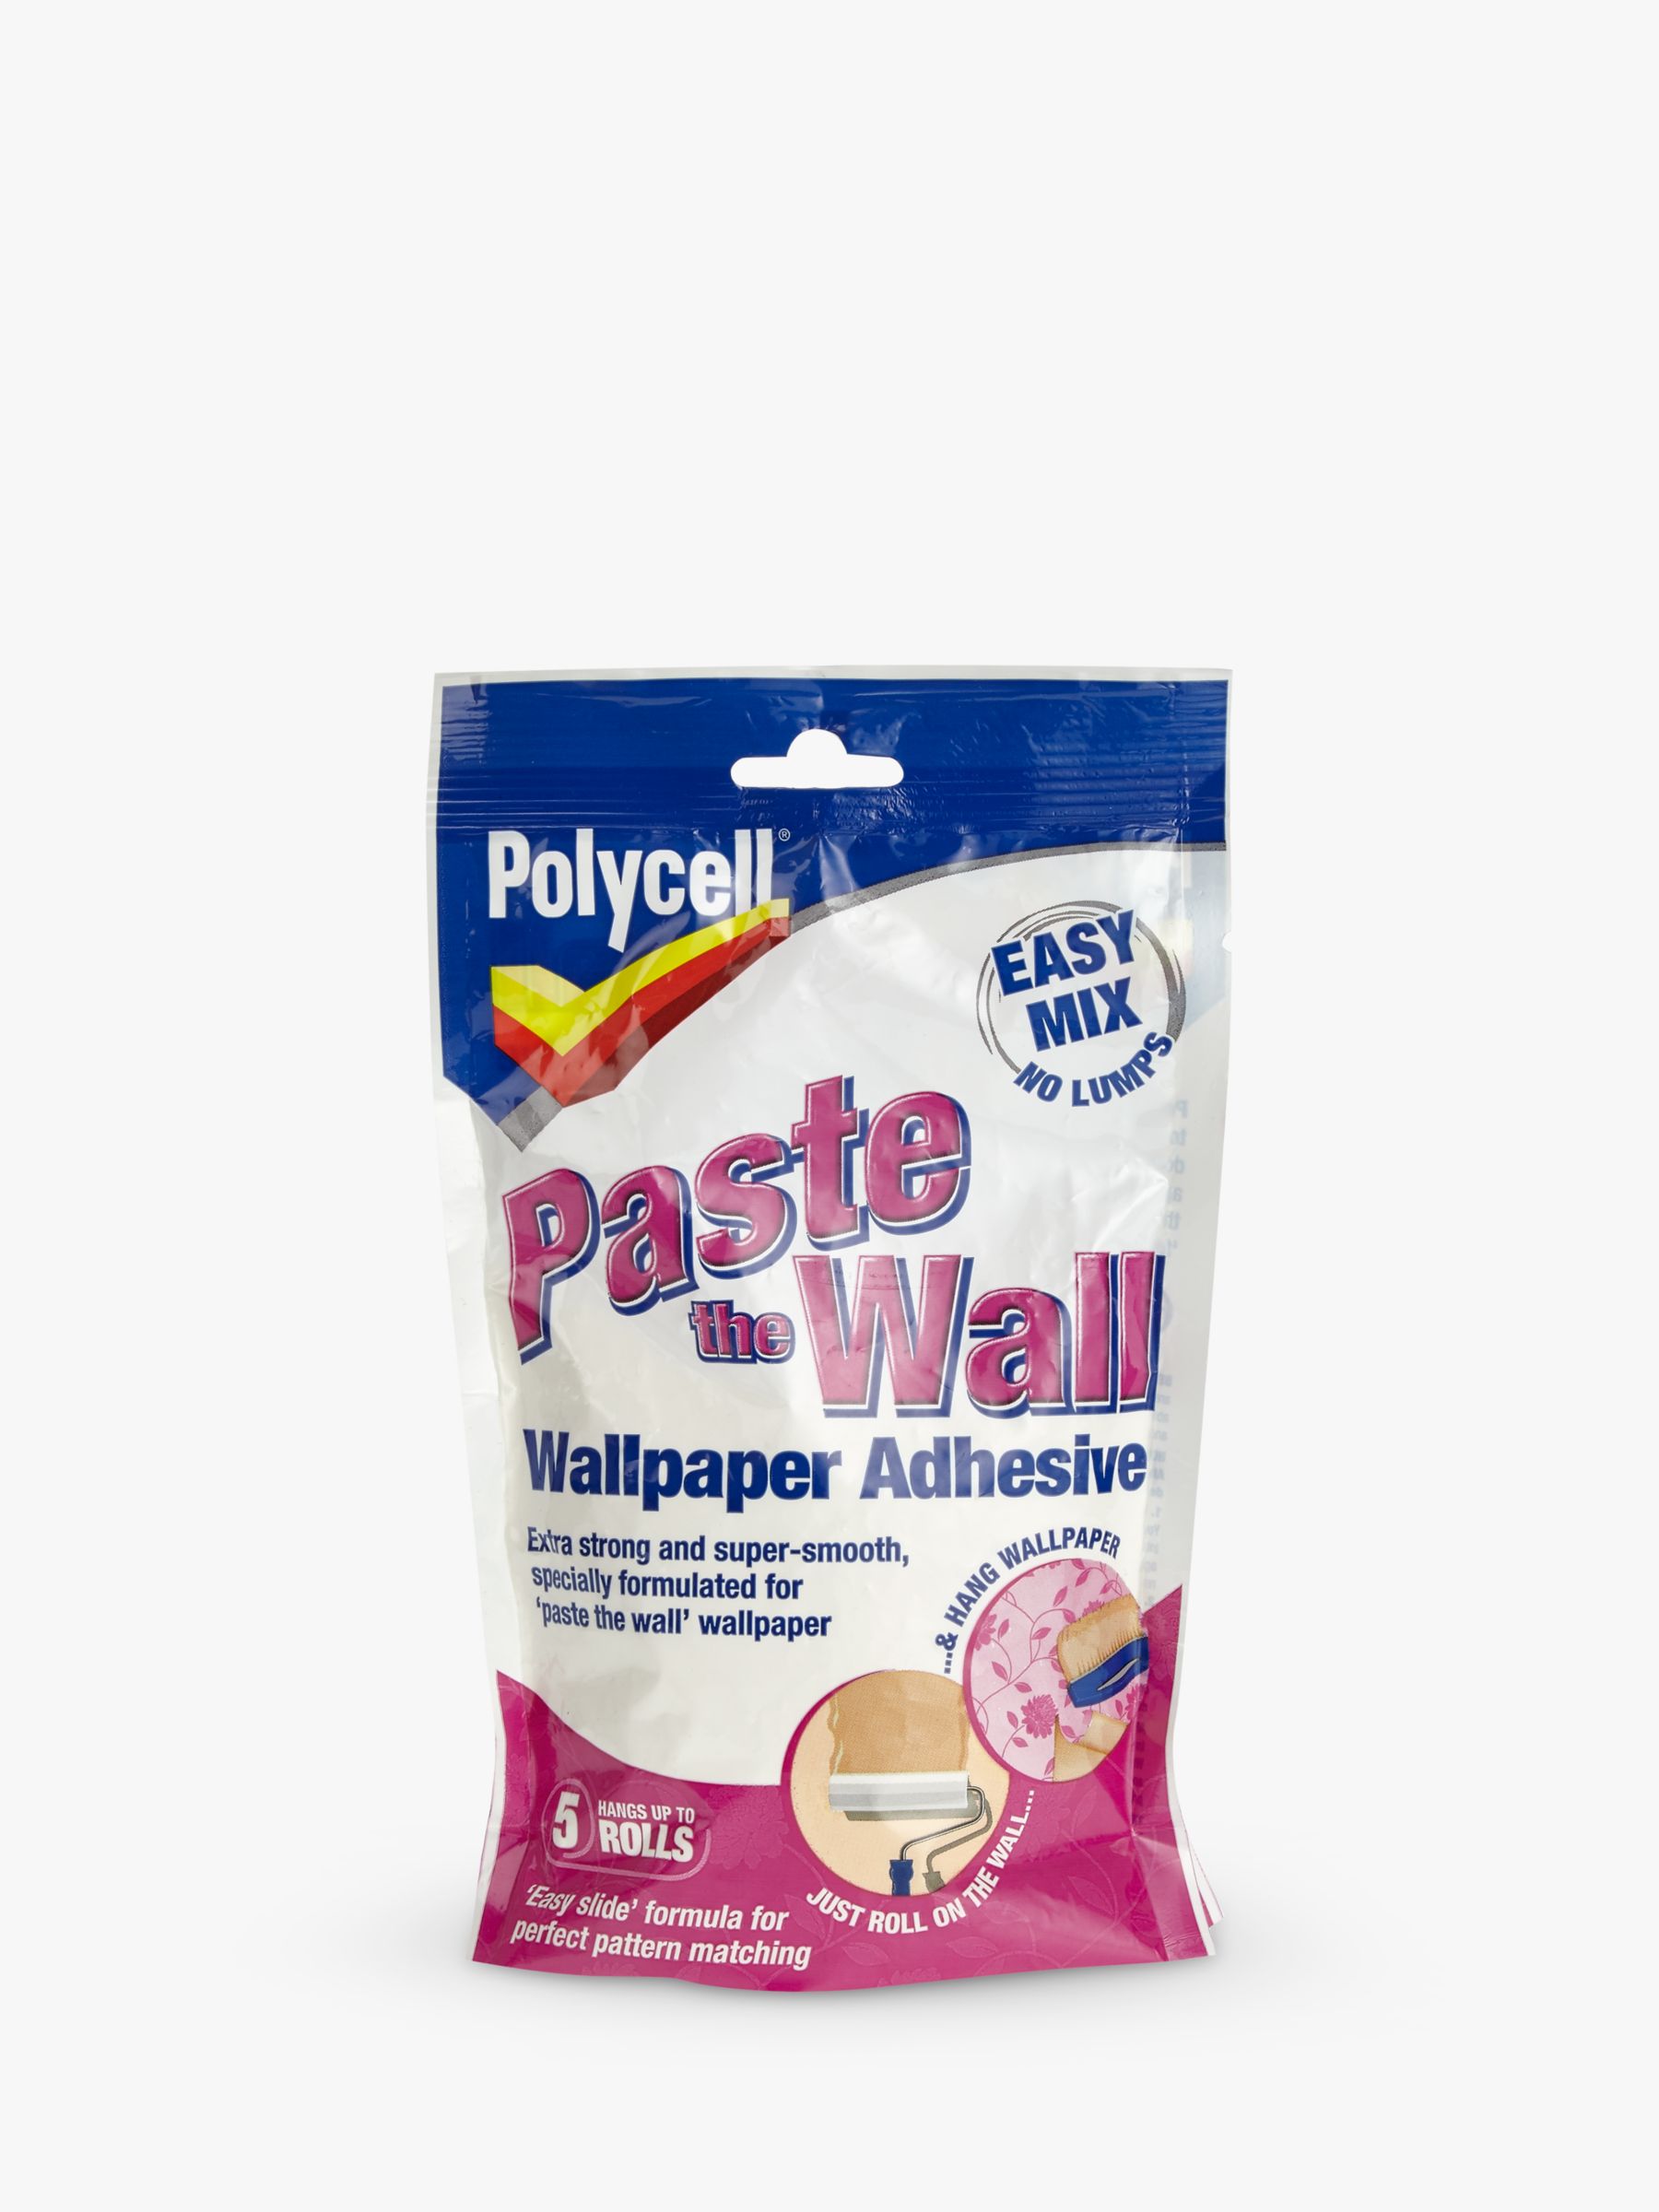 Polycell Paste the Wall Wallpaper Adhesive